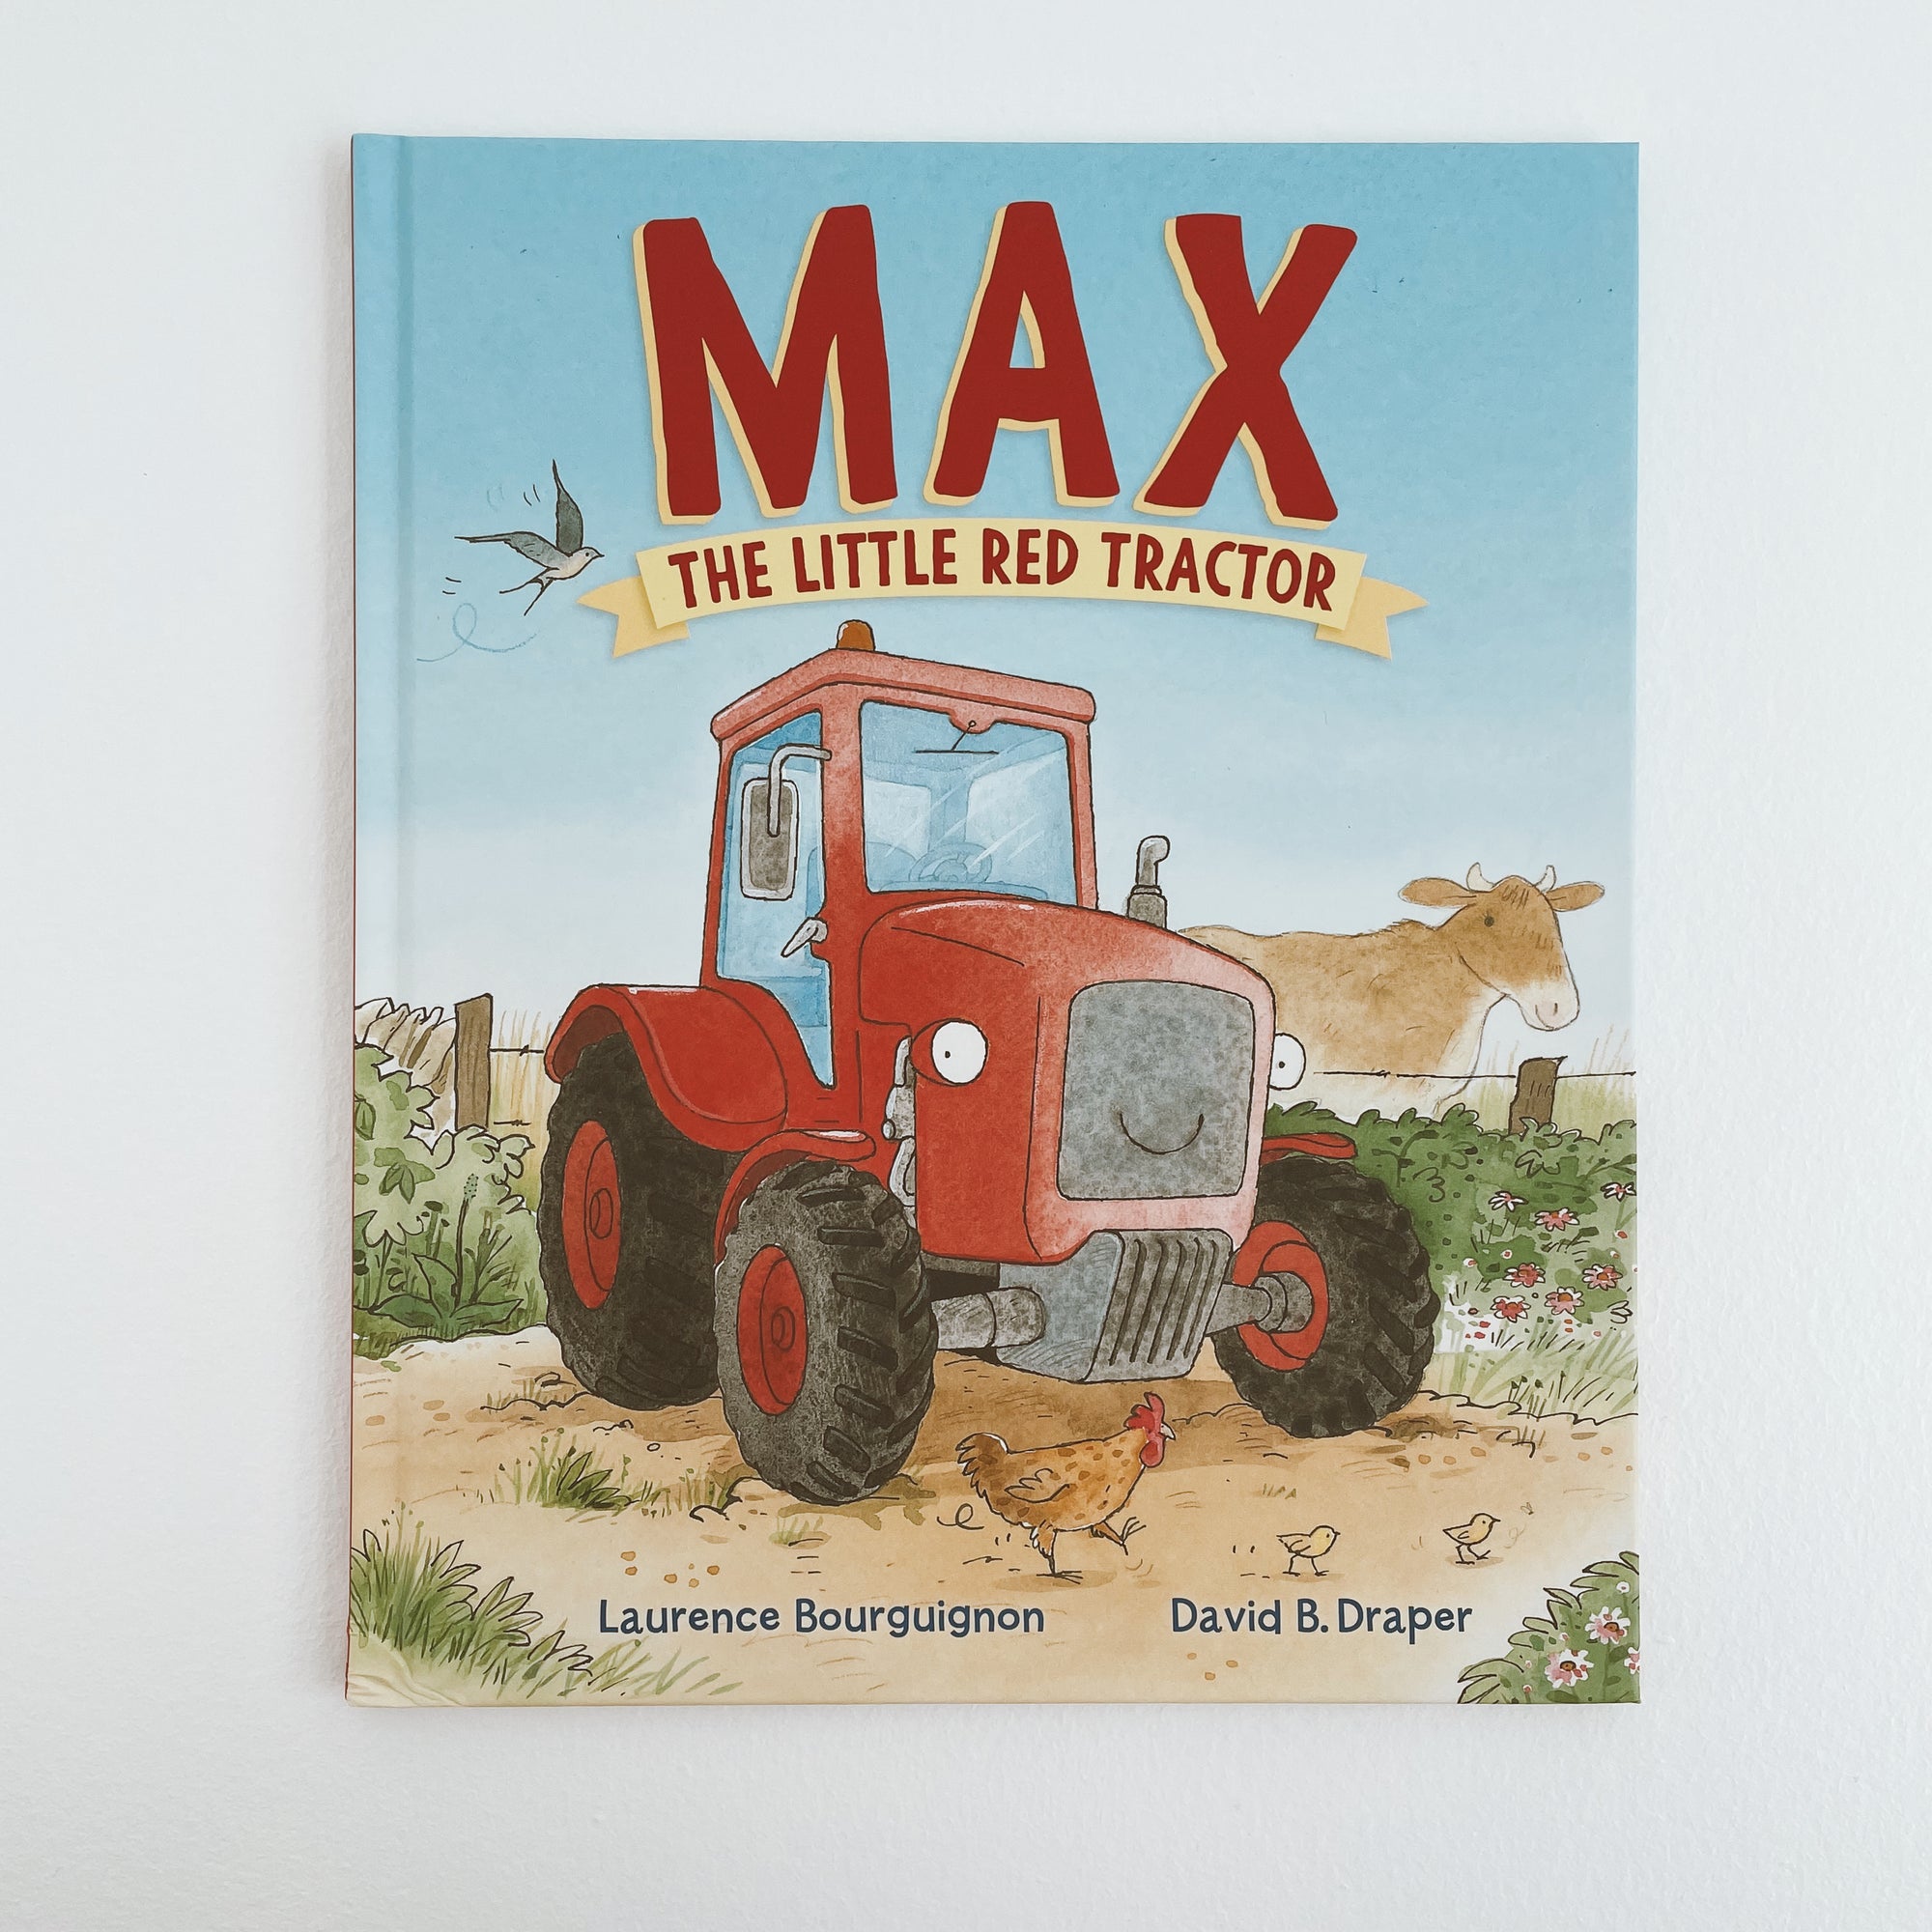 MAX: THE LITTLE RED TRACTOR